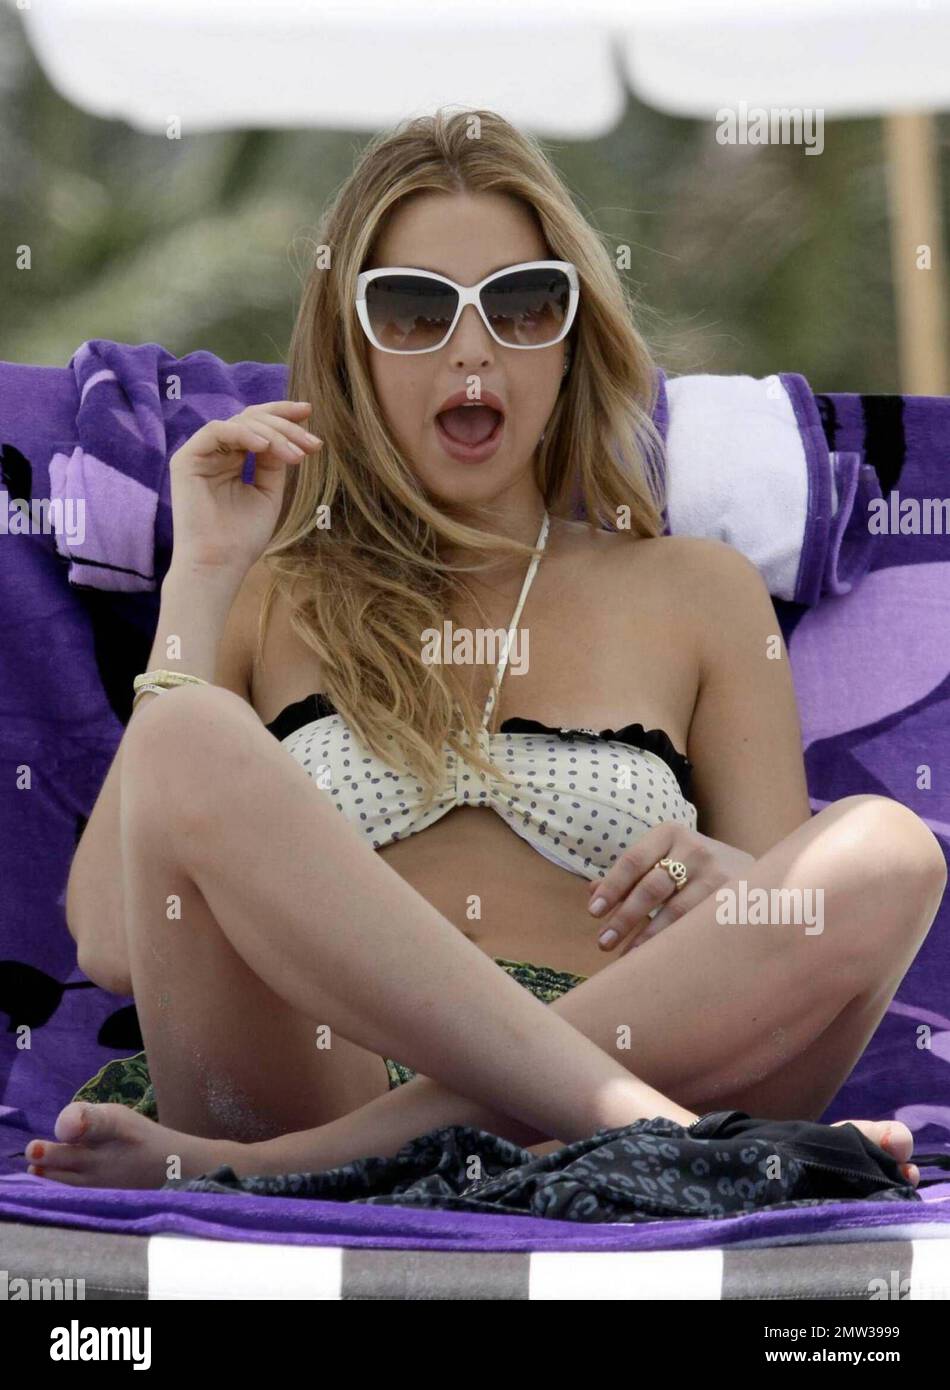 'The City' star Whitney Port films scenes for the show while soaking up the sun and relaxing on Miami Beach with friend, actress Roxy Olin. Port and Olin are in town attending the Mercedes-Benz Fashion Week Swim. Miami Beach, FL. 7/19/09. Stock Photo